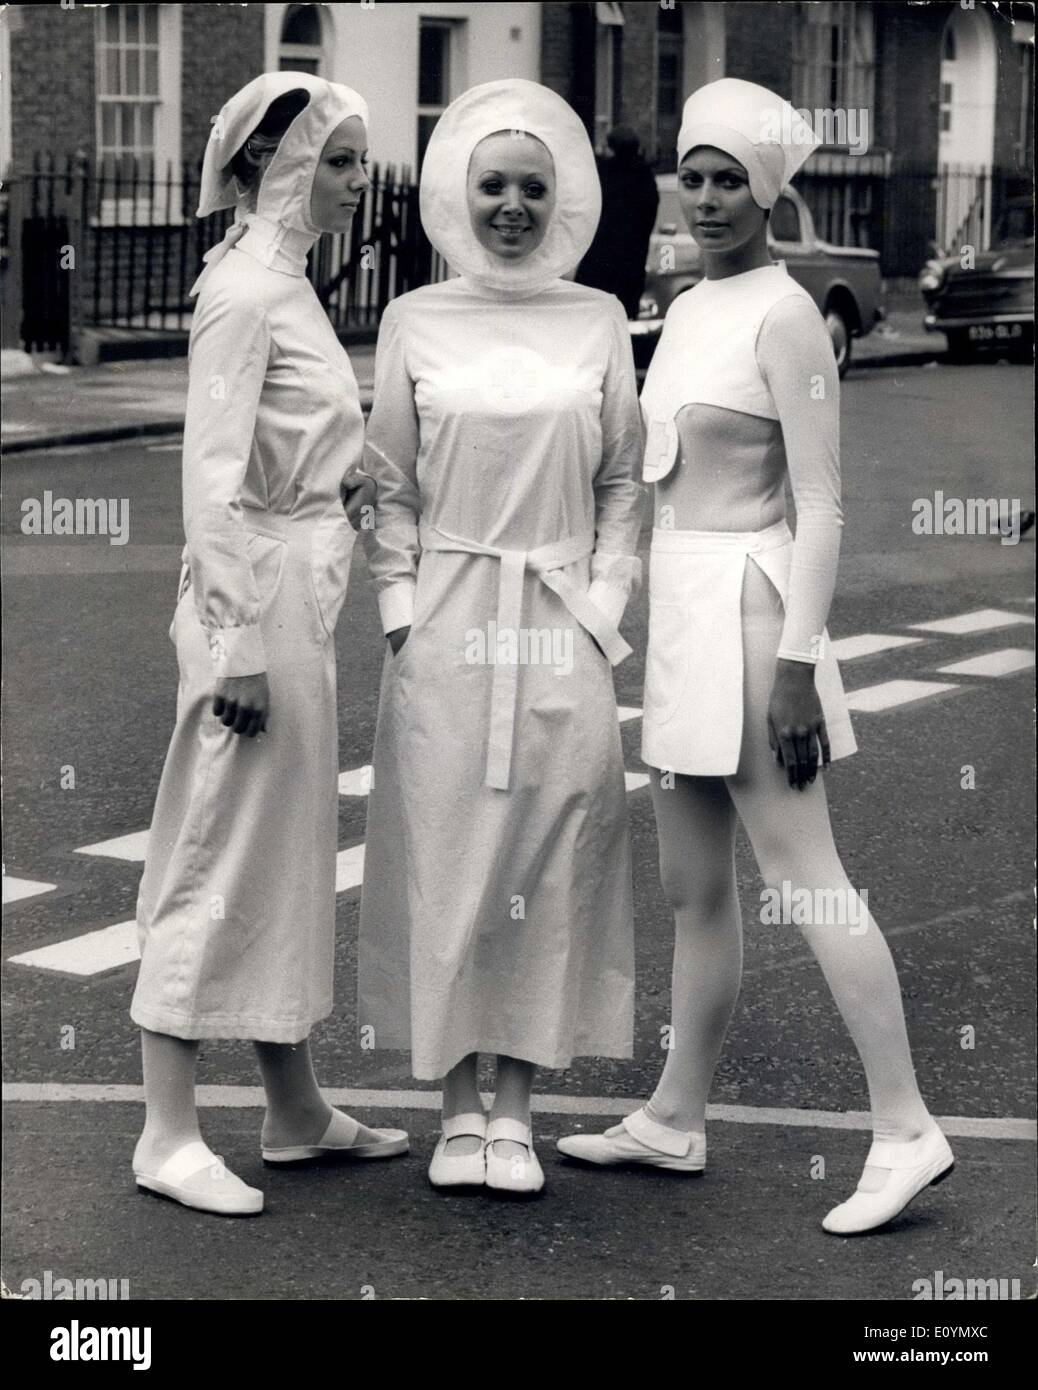 Oct. 25, 1970 - Pierre Cardin's New Uniforms for Nurses shows at Today's Preview of the London Nursing Exhibition.: Revolutionary designs for new uniforms for nurses by Pierre Cardin, were shown at today's press preview of the London Nursing Exhibition, which opens at Seymour Hall, London, W.1. tomorrow The use of colours is a deliberate move by Cardin to lighten the uniforms of war uniforms, and the main consideration in every case was the need for freedom and hygiene. Thus the uniforms have been designed to afford maximum movement. Photo shows Stock Photo